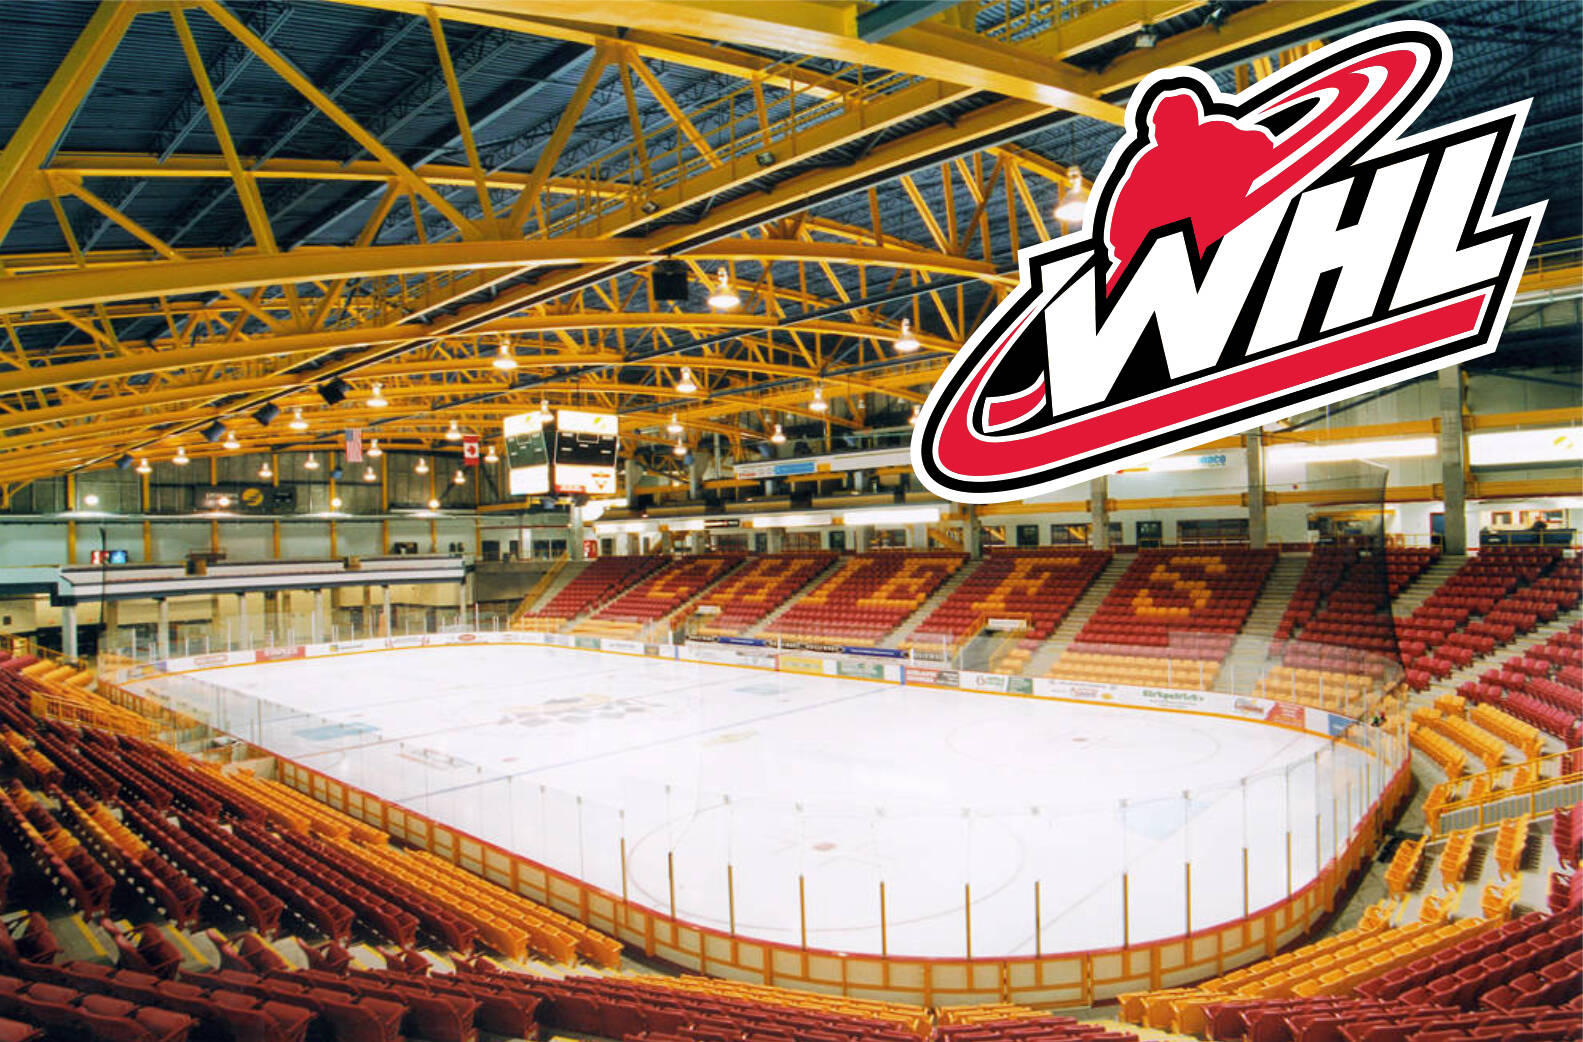 The Chilliwack Coliseum was built to house a Western Hockey League team, and the Chilliwack Bruins called it home from 2006 to 2011. But for now, the prospect of a WHL return is unlikely.